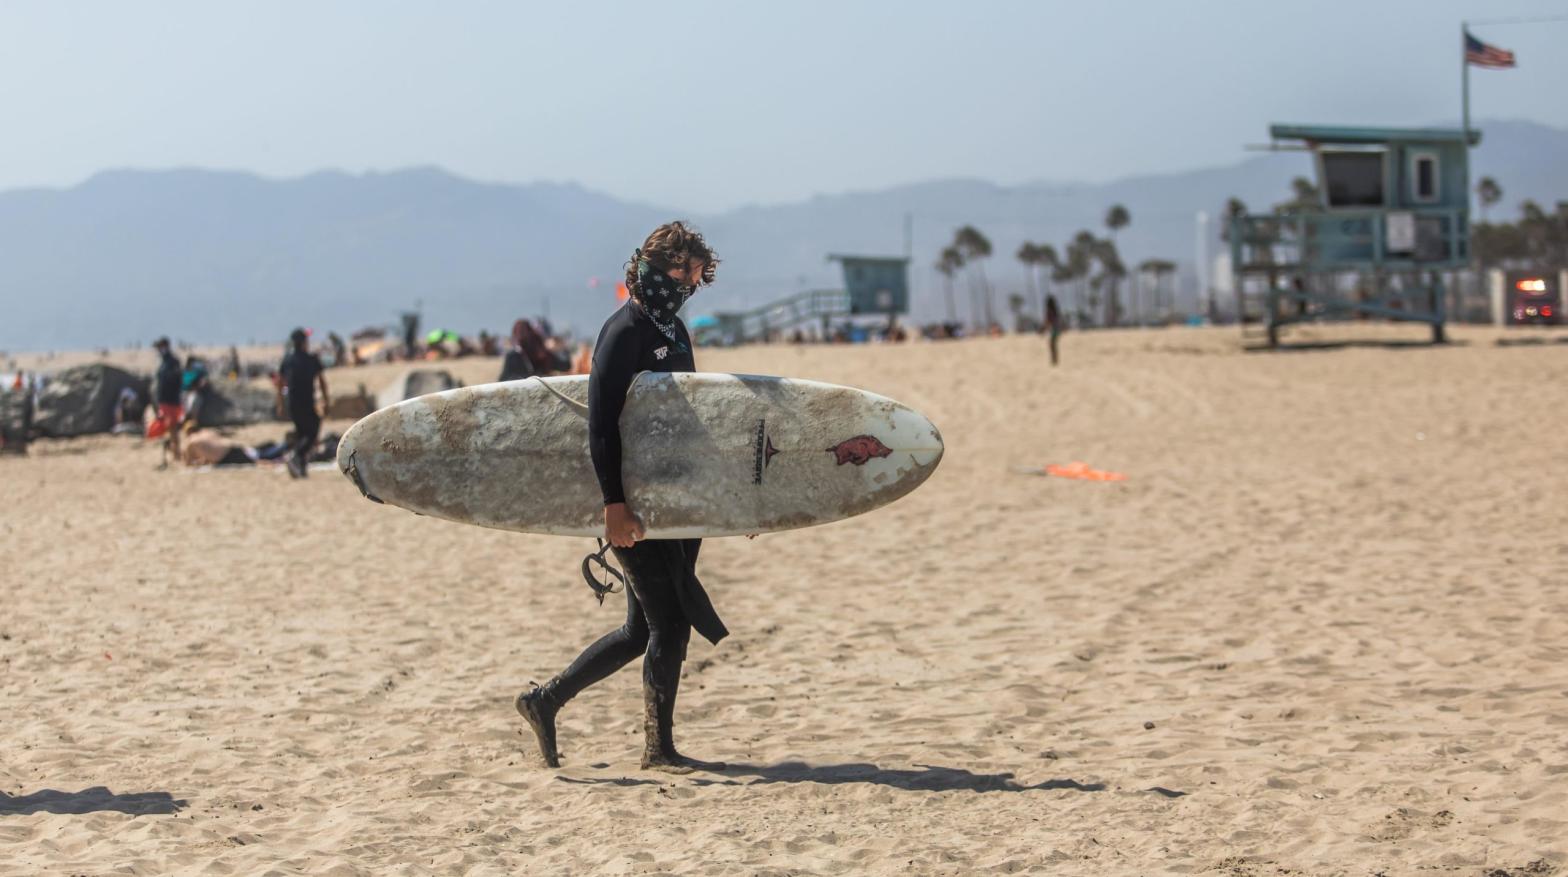 A masked surfer walking at Venice Beach in California during Memorial Day weekend in May. (Photo: Apu Gomes, Getty Images)